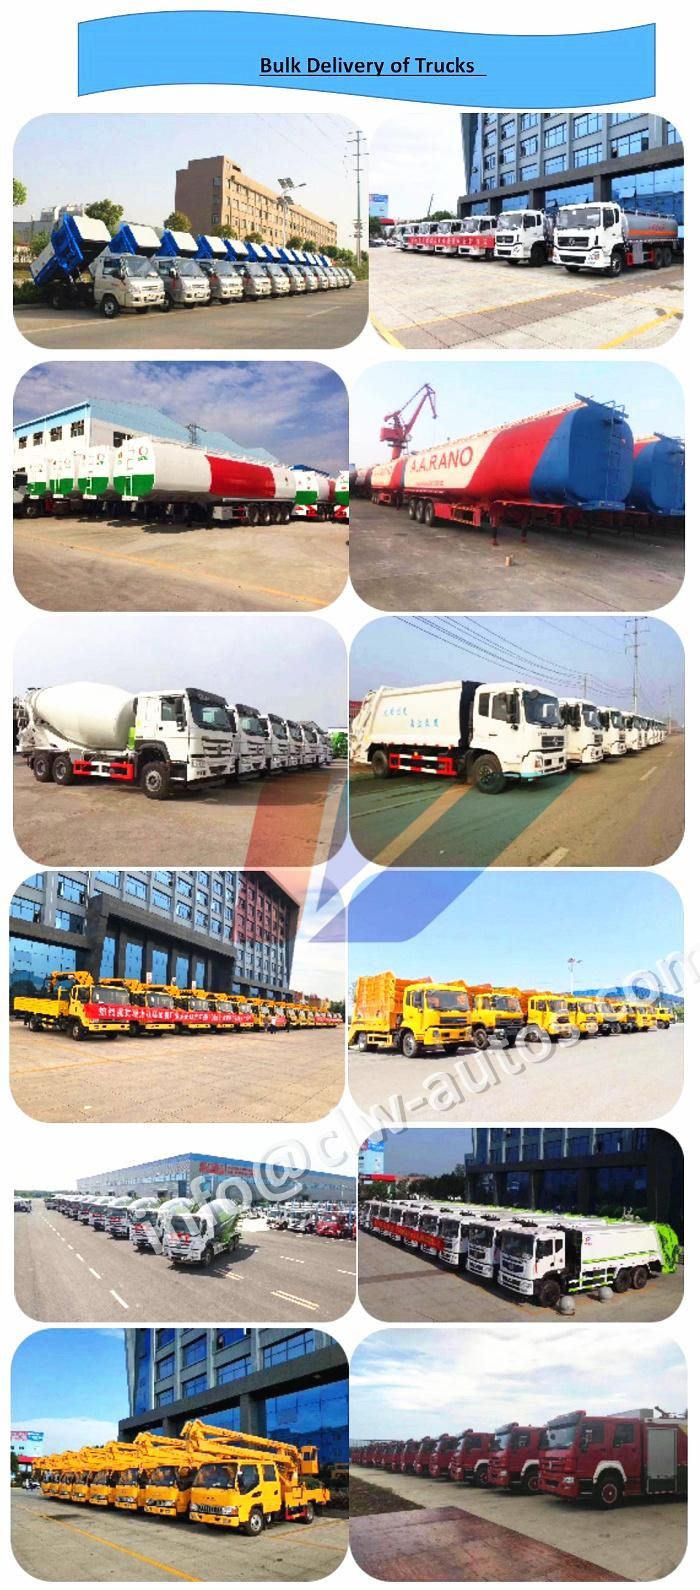 Front Loader Garbage Waste Collection Vehicle 12m3 13m3 14m3 15m3 Container Attachable Hook Lift Garbage Truck